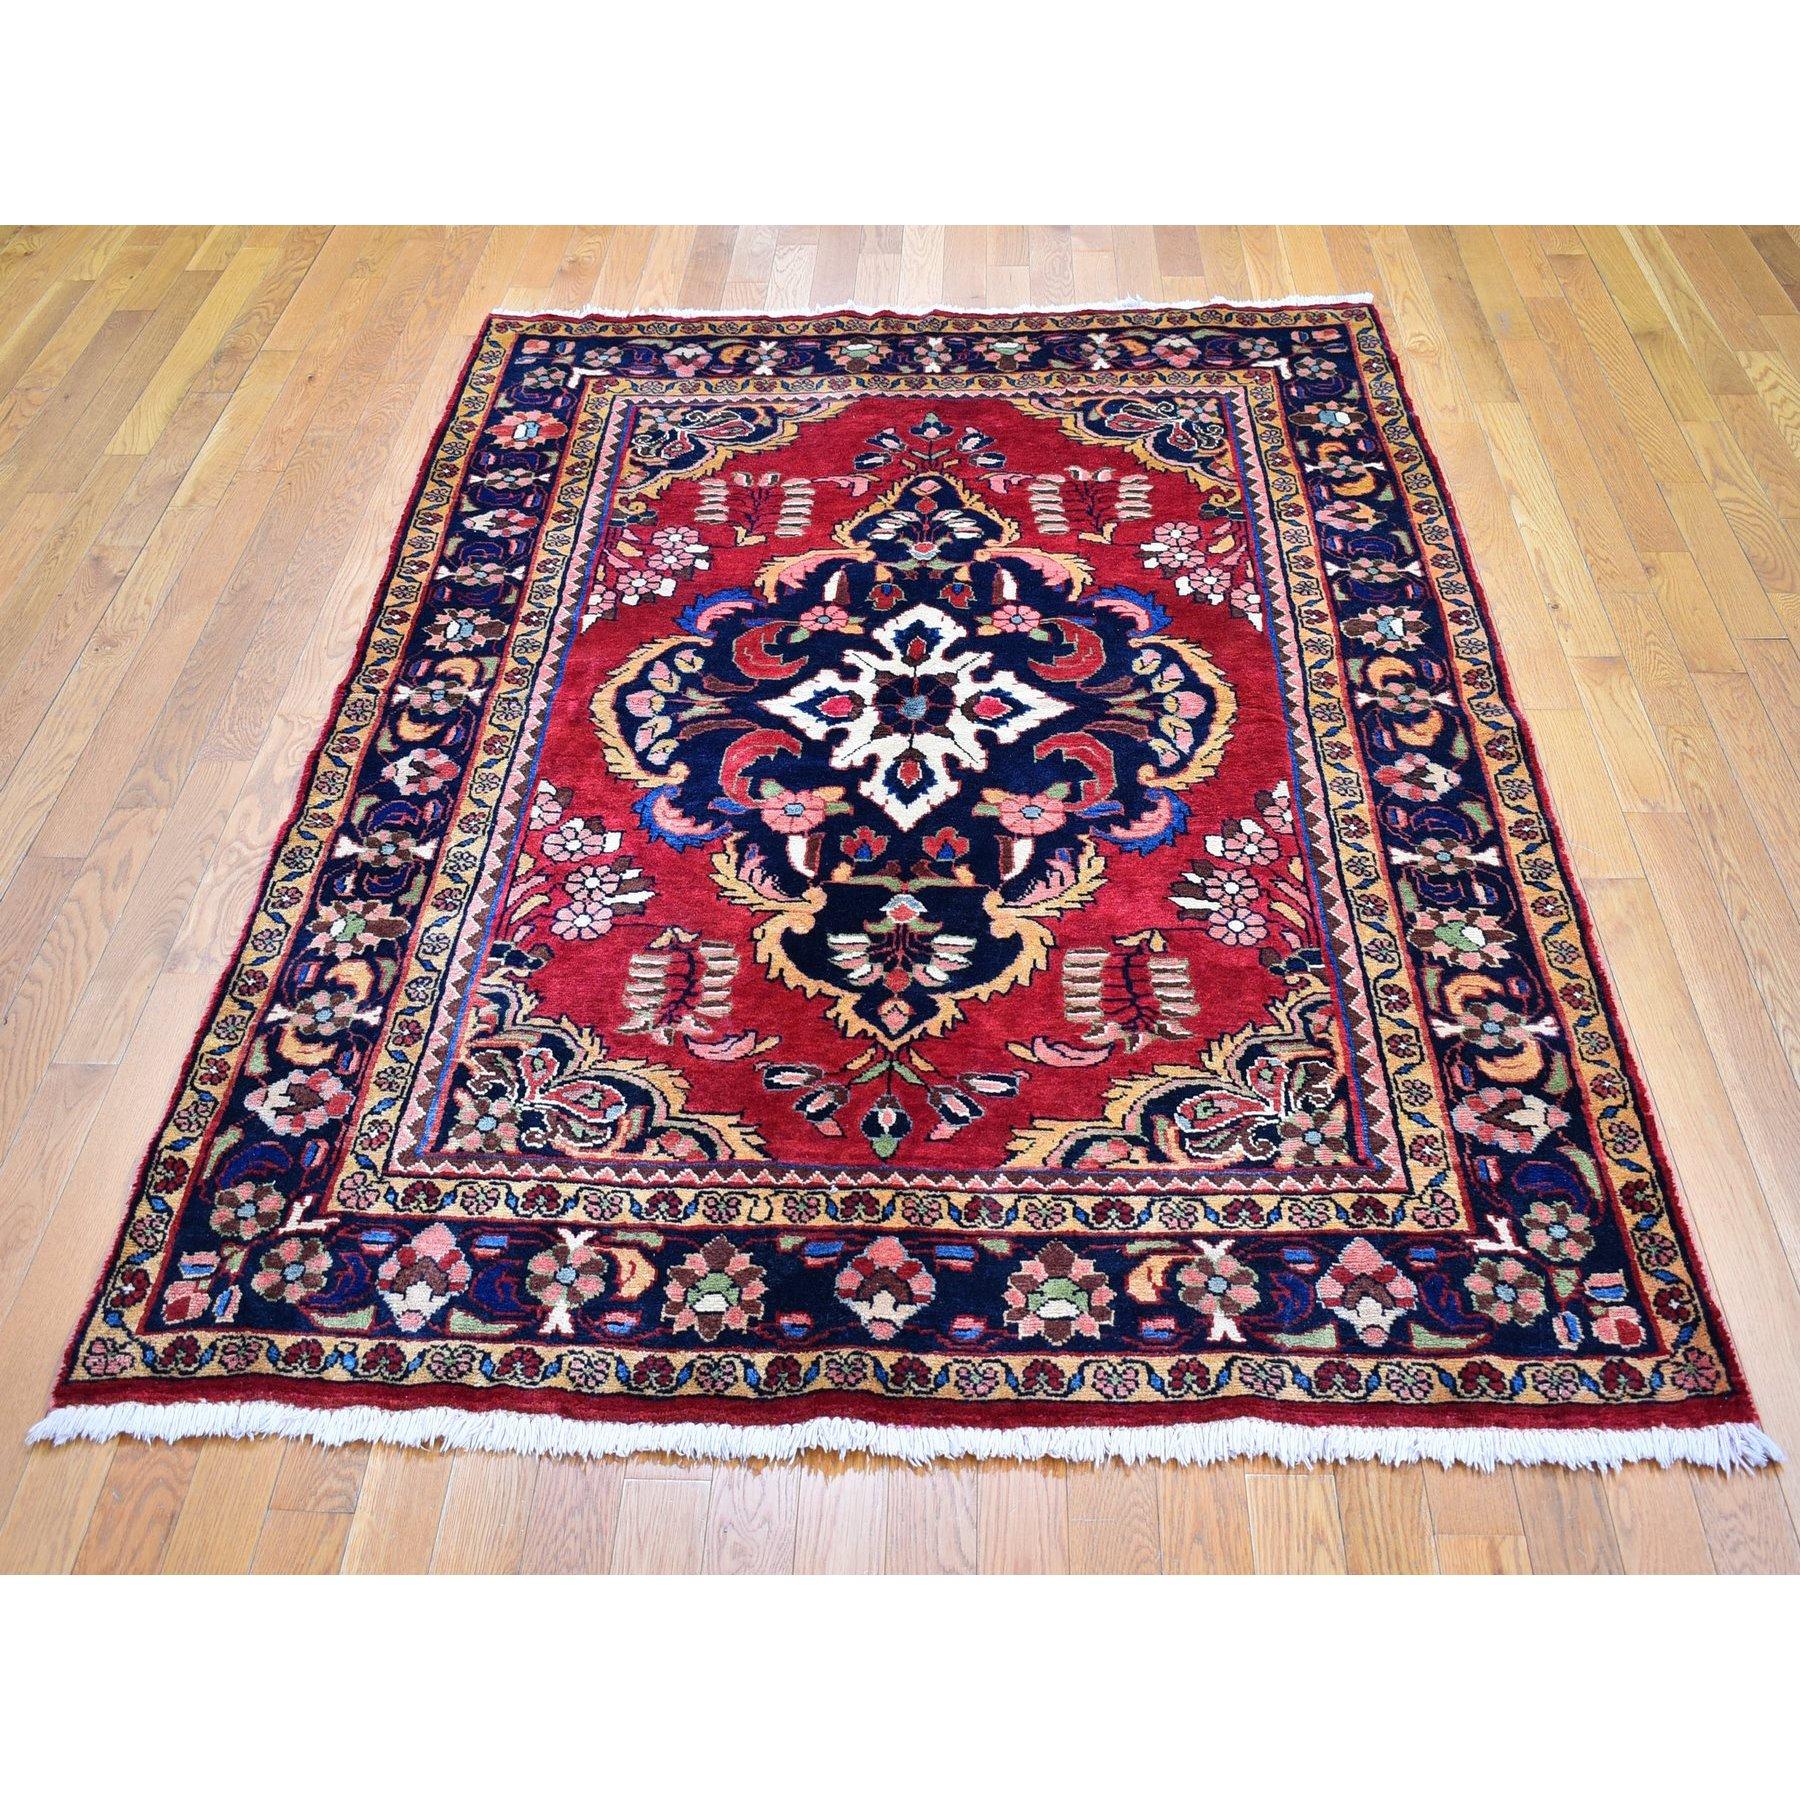 This fabulous hand-knotted carpet has been created and designed for extra strength and durability. This rug has been handcrafted for weeks in the traditional method that is used to make
Exact Rug Size in Feet and Inches : 5'5